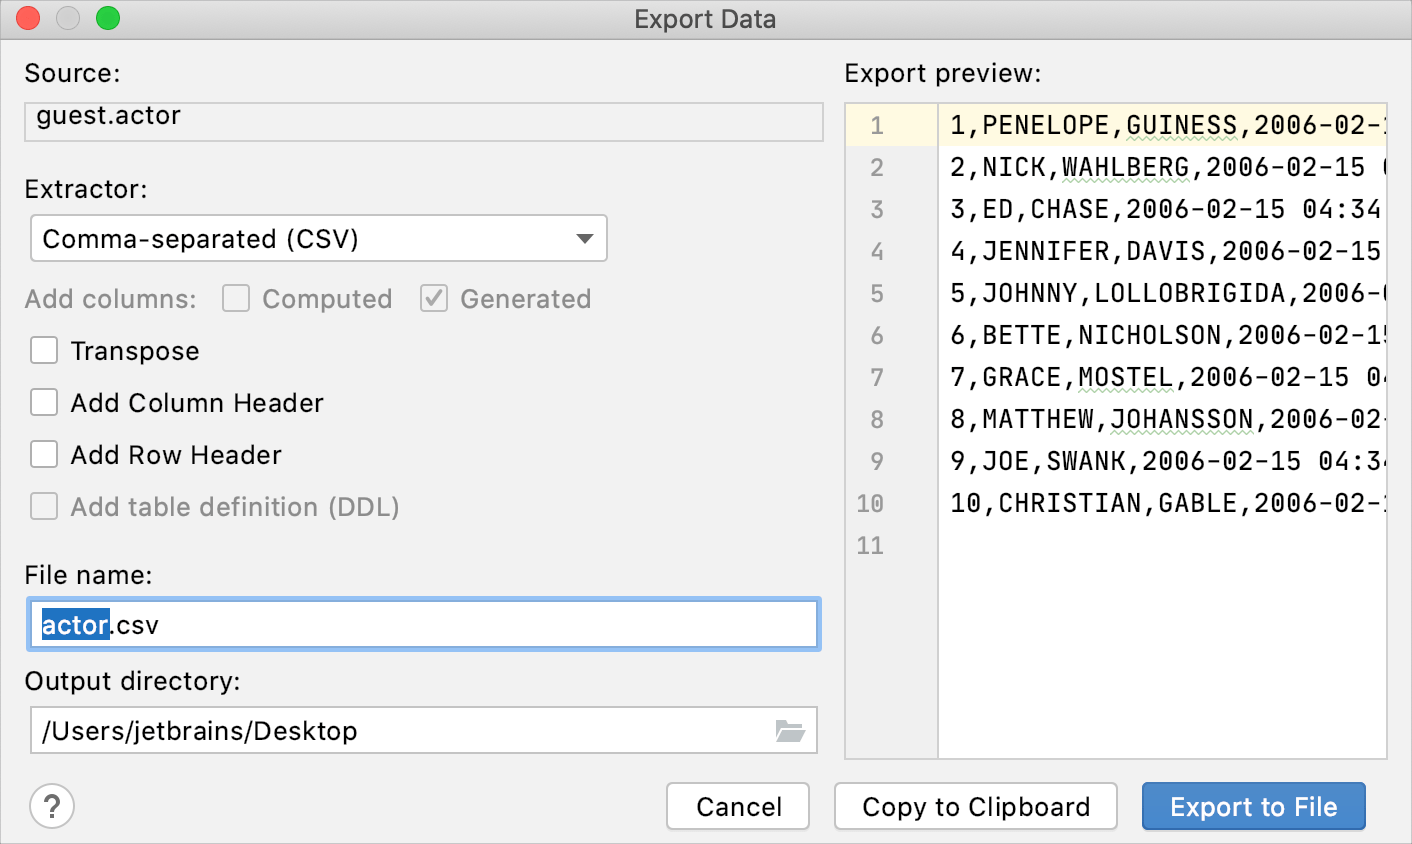 File Name Is Preselected In The Export Data Dialog